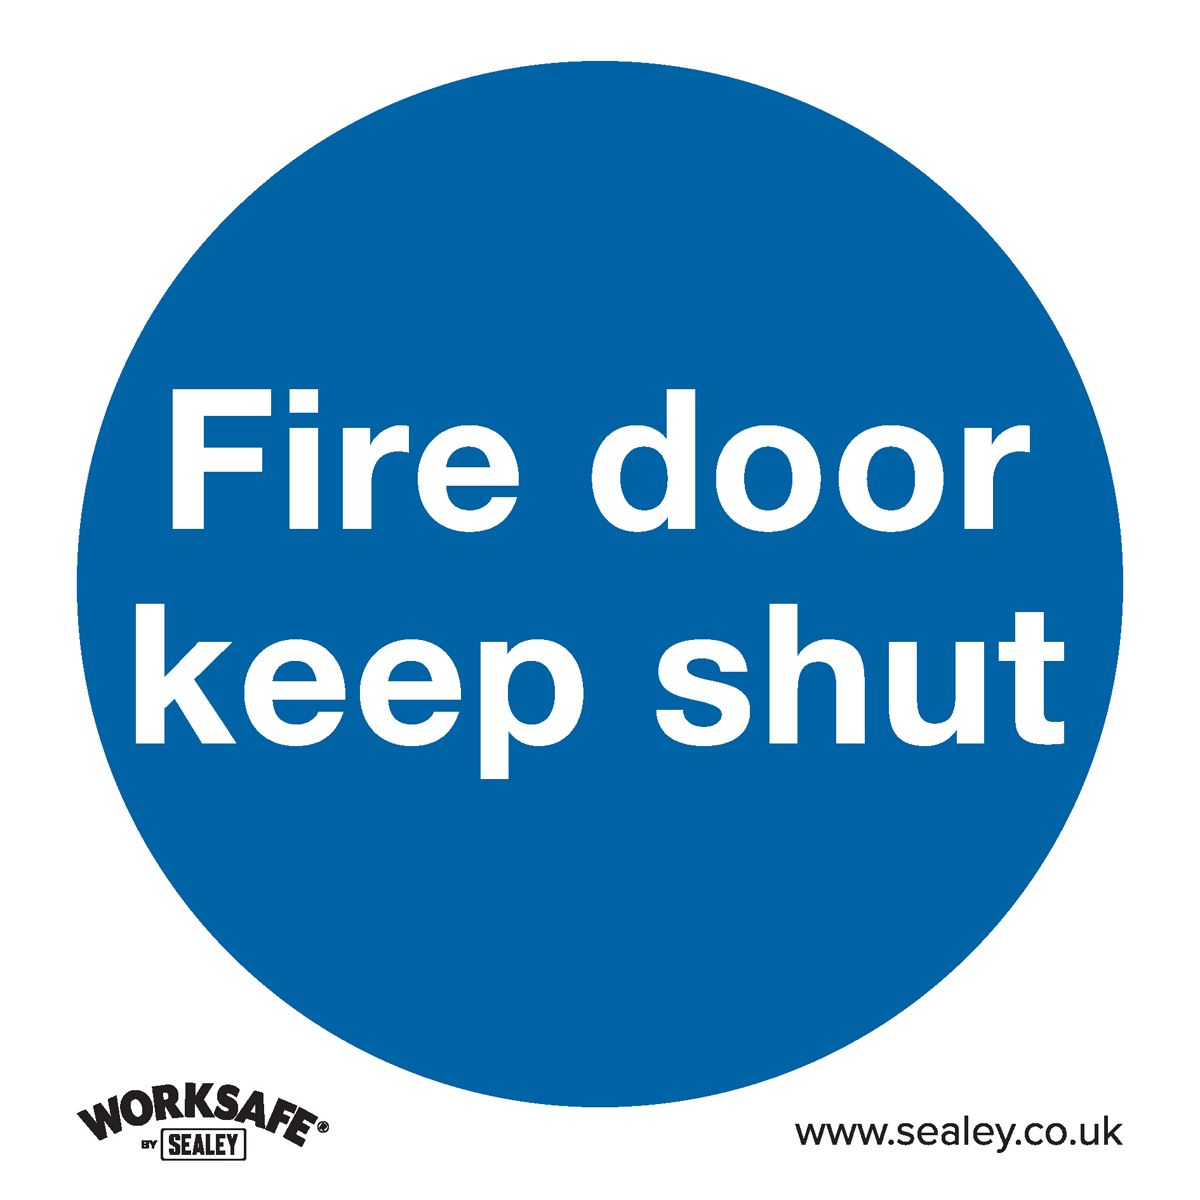 Worksafe by Sealey Mandatory Safety Sign - Fire Door Keep Shut - Self-Adhesive Vinyl - Pack of 10